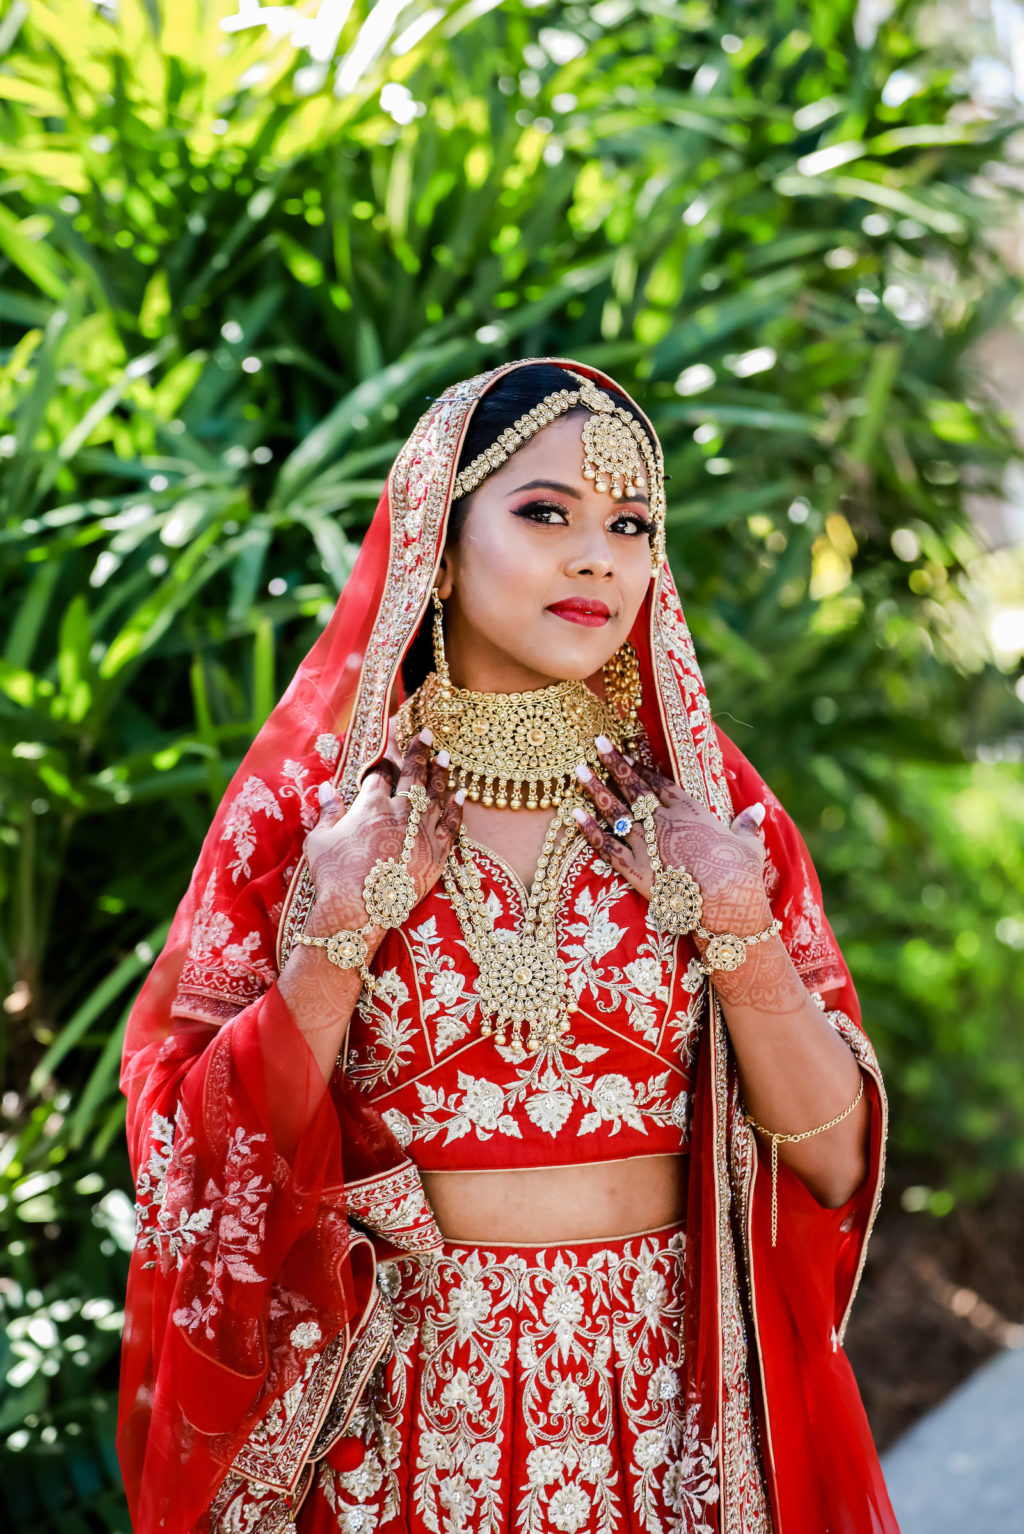 Indian Hindu Bride Wearing Red and Gold Lengha Two Piece Dress and Veil with Elaborate Jewelry, Gold Choker, Headpiece and Dangle Earrings, Henna Tattoo Hands | Tampa Bay Wedding Photographer Lifelong Photography Studios